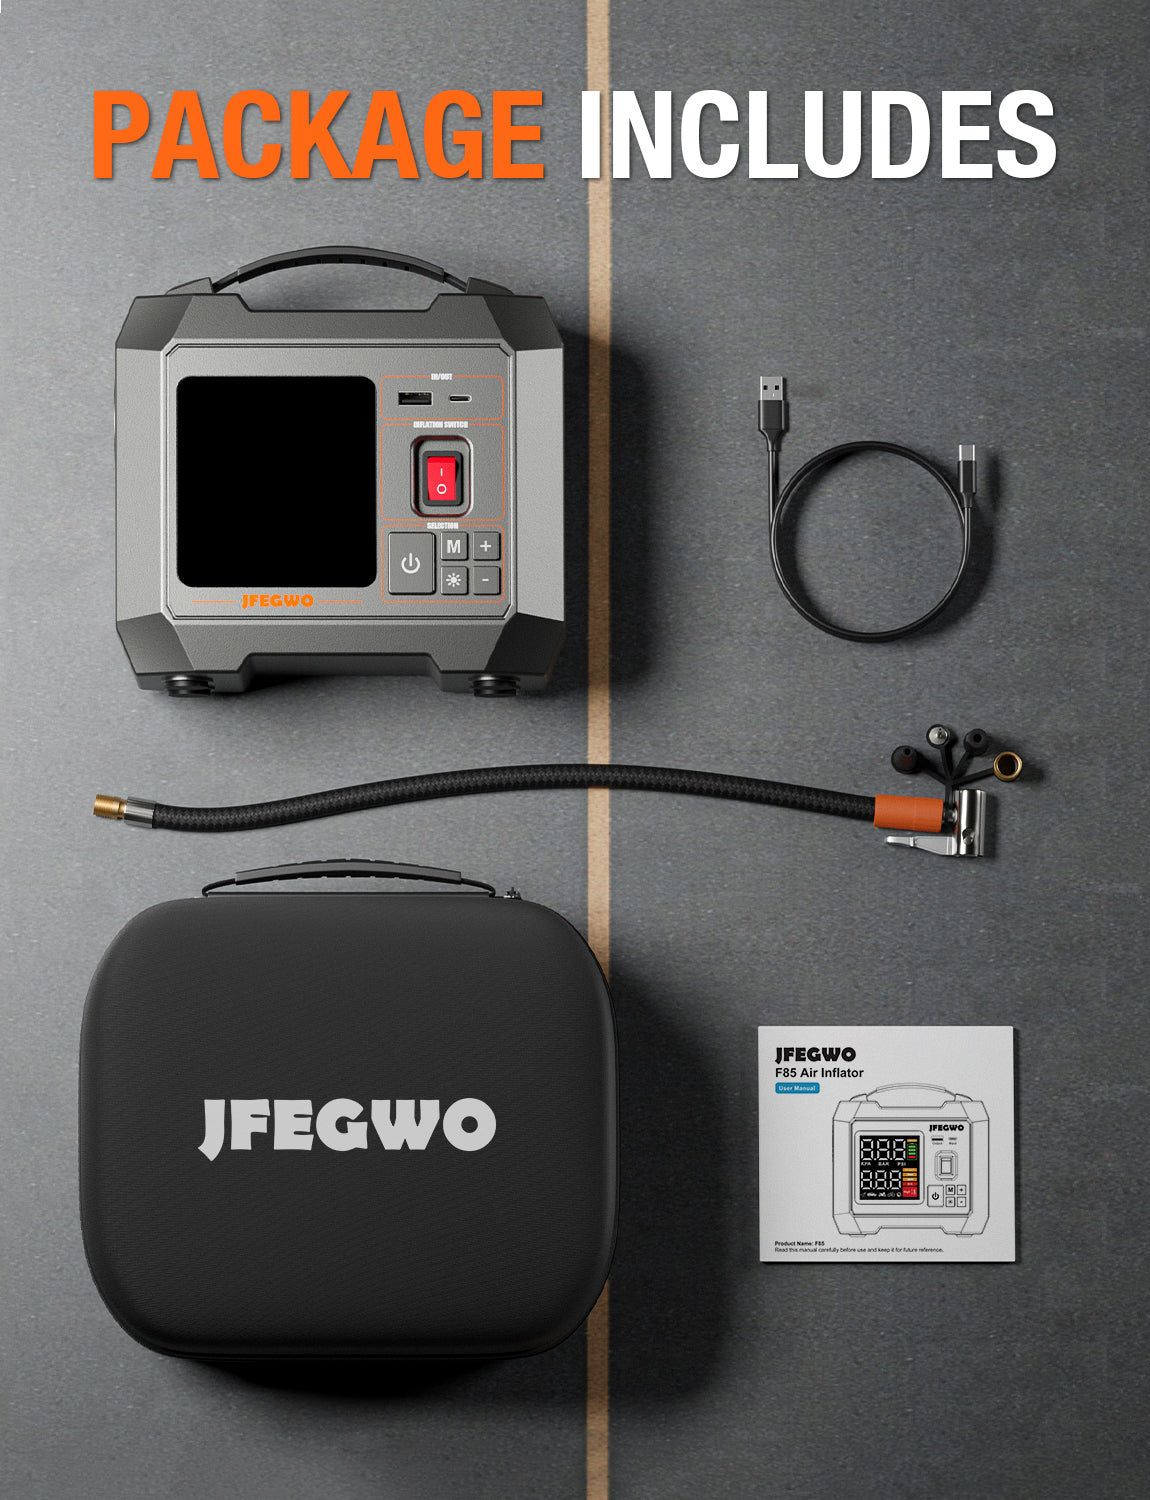 JFEGWO Portable Air Inflator, Red